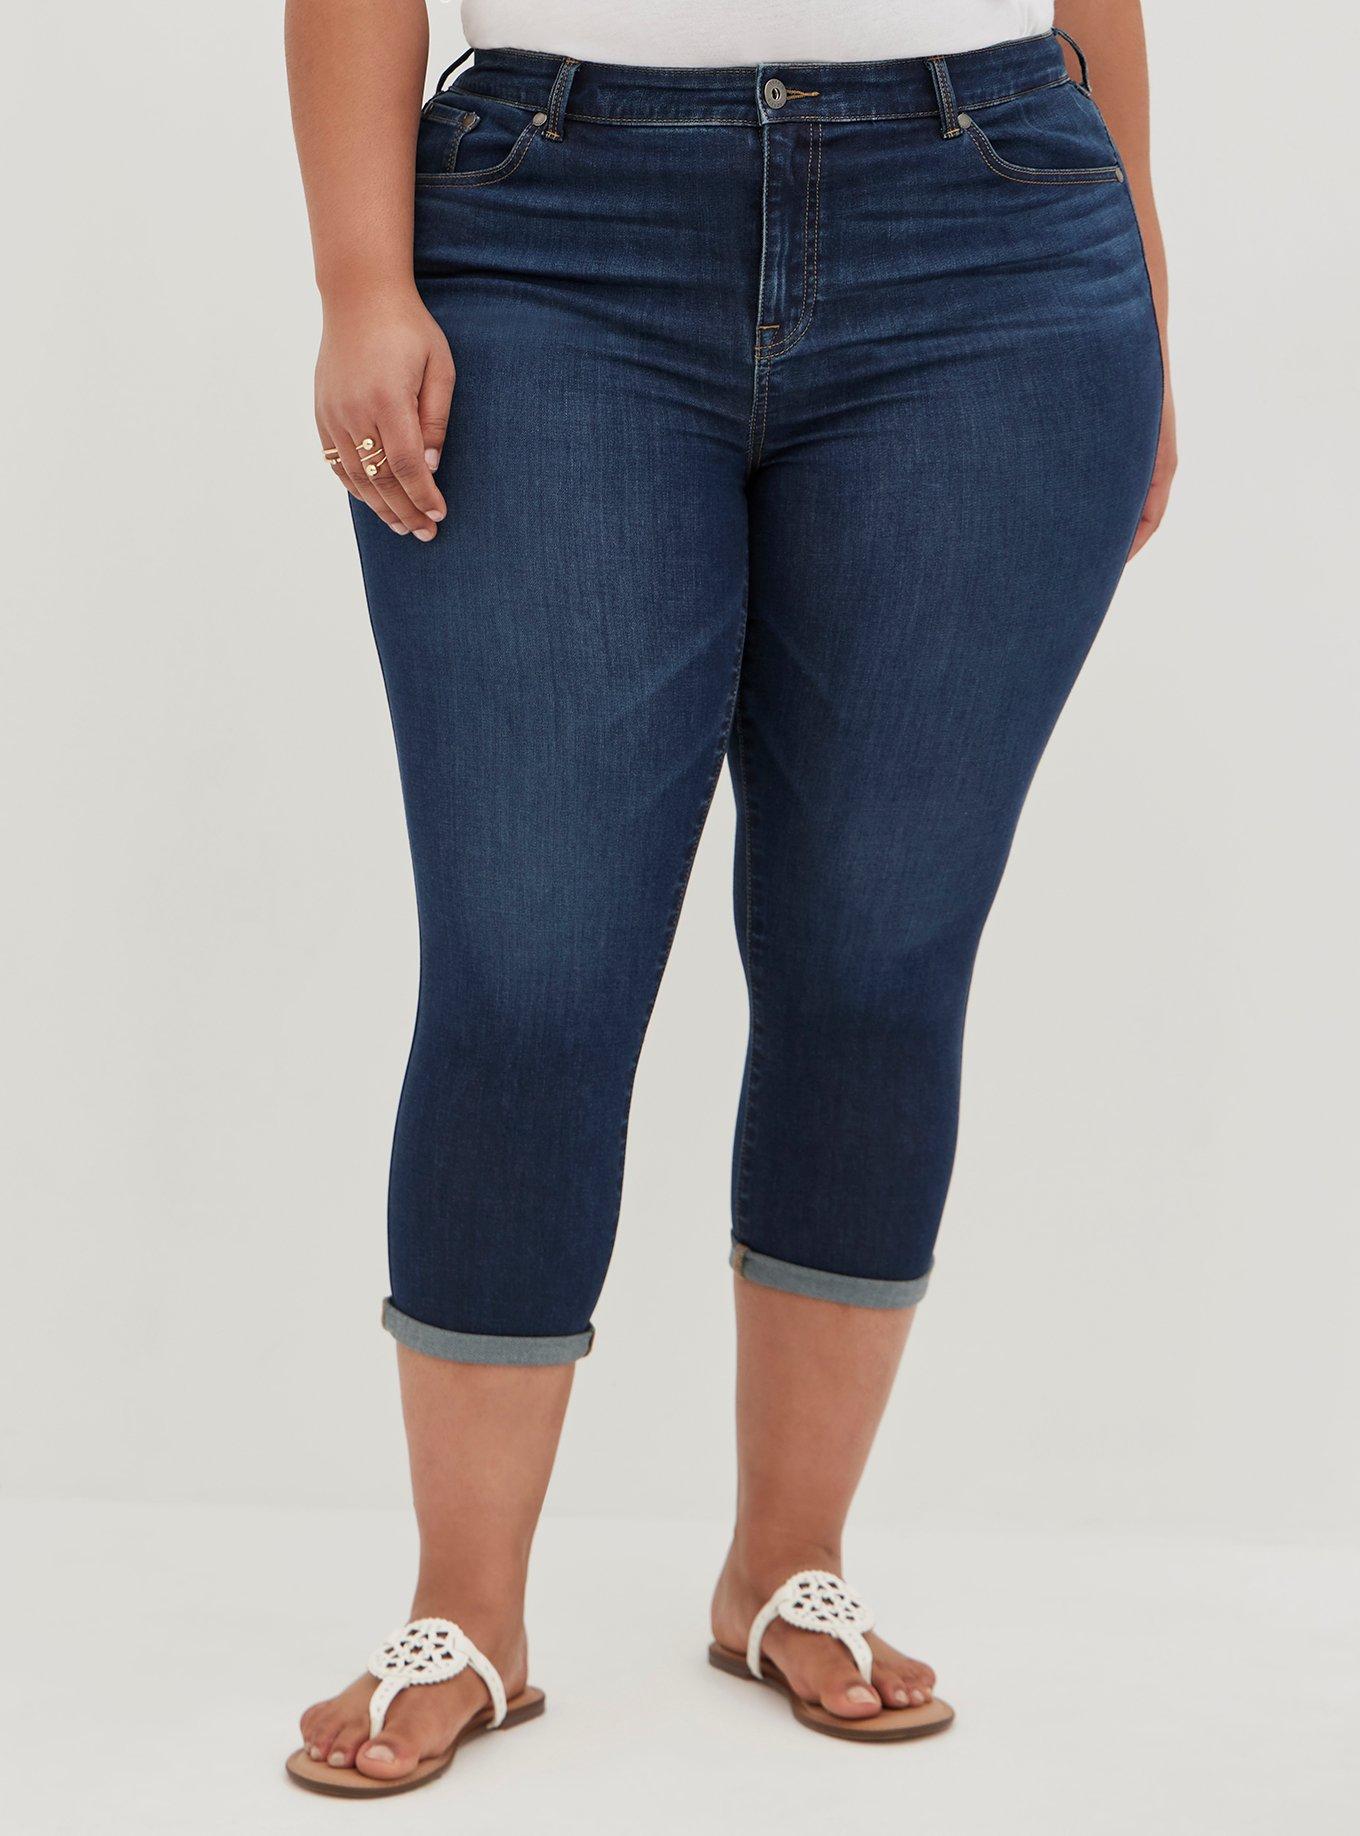 Torrid #FeelTheFit Crop Midfit Super Skinny Super Soft Jeans New With Tags Size  18